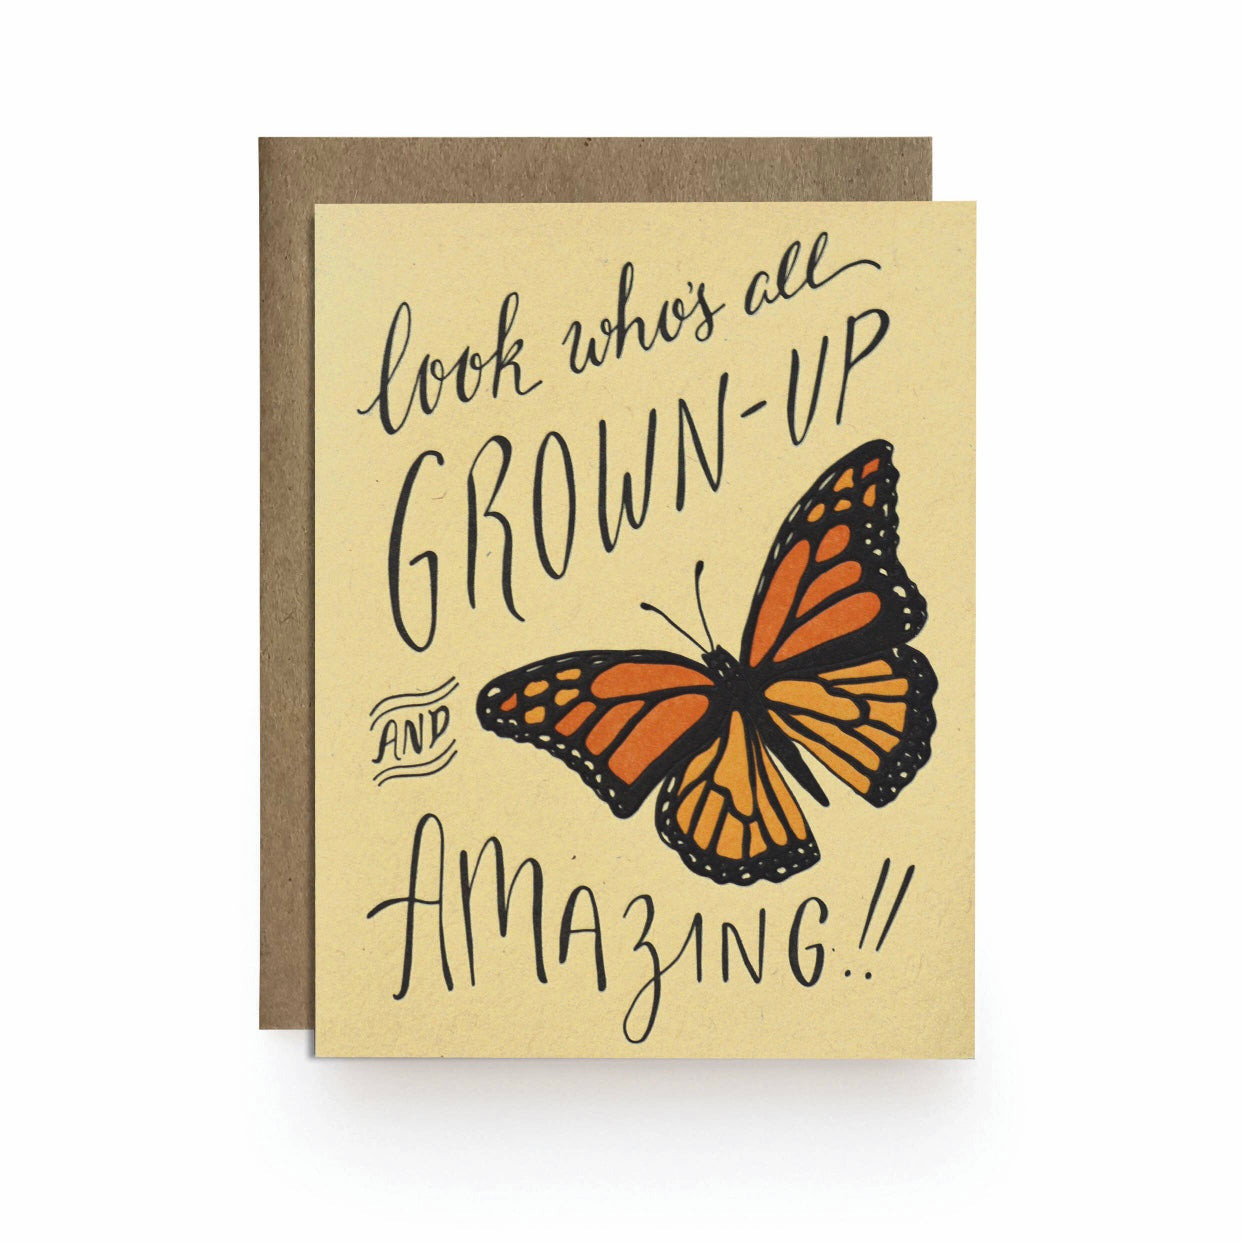 look who's all grown up and amazing greeting card